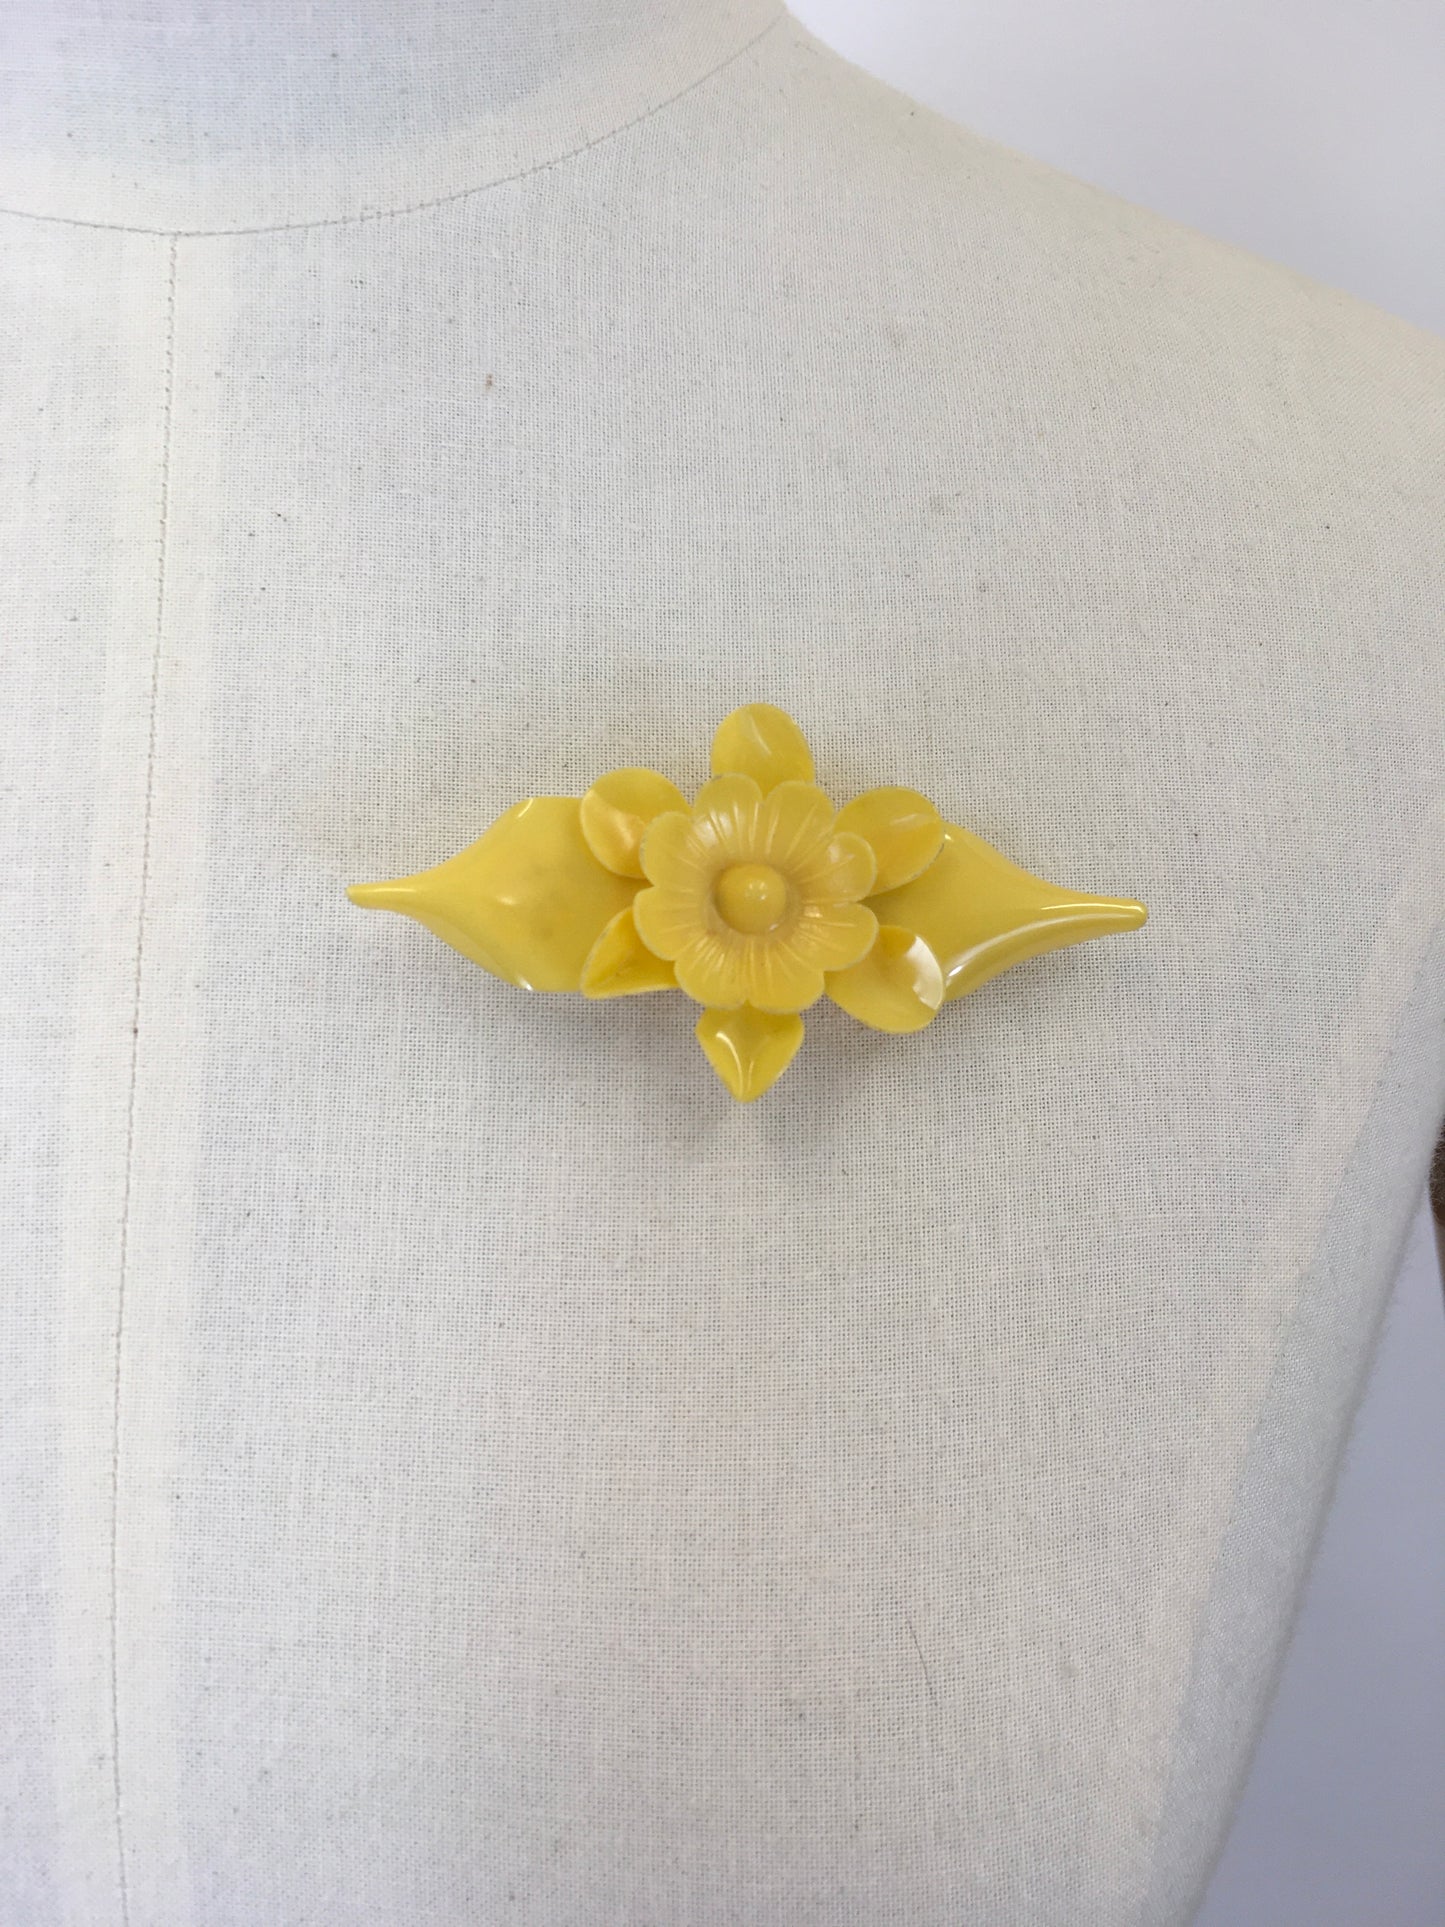 Original Late 1930's Early 1940's Celluloid Flora Brooch - In Primrose Yellow